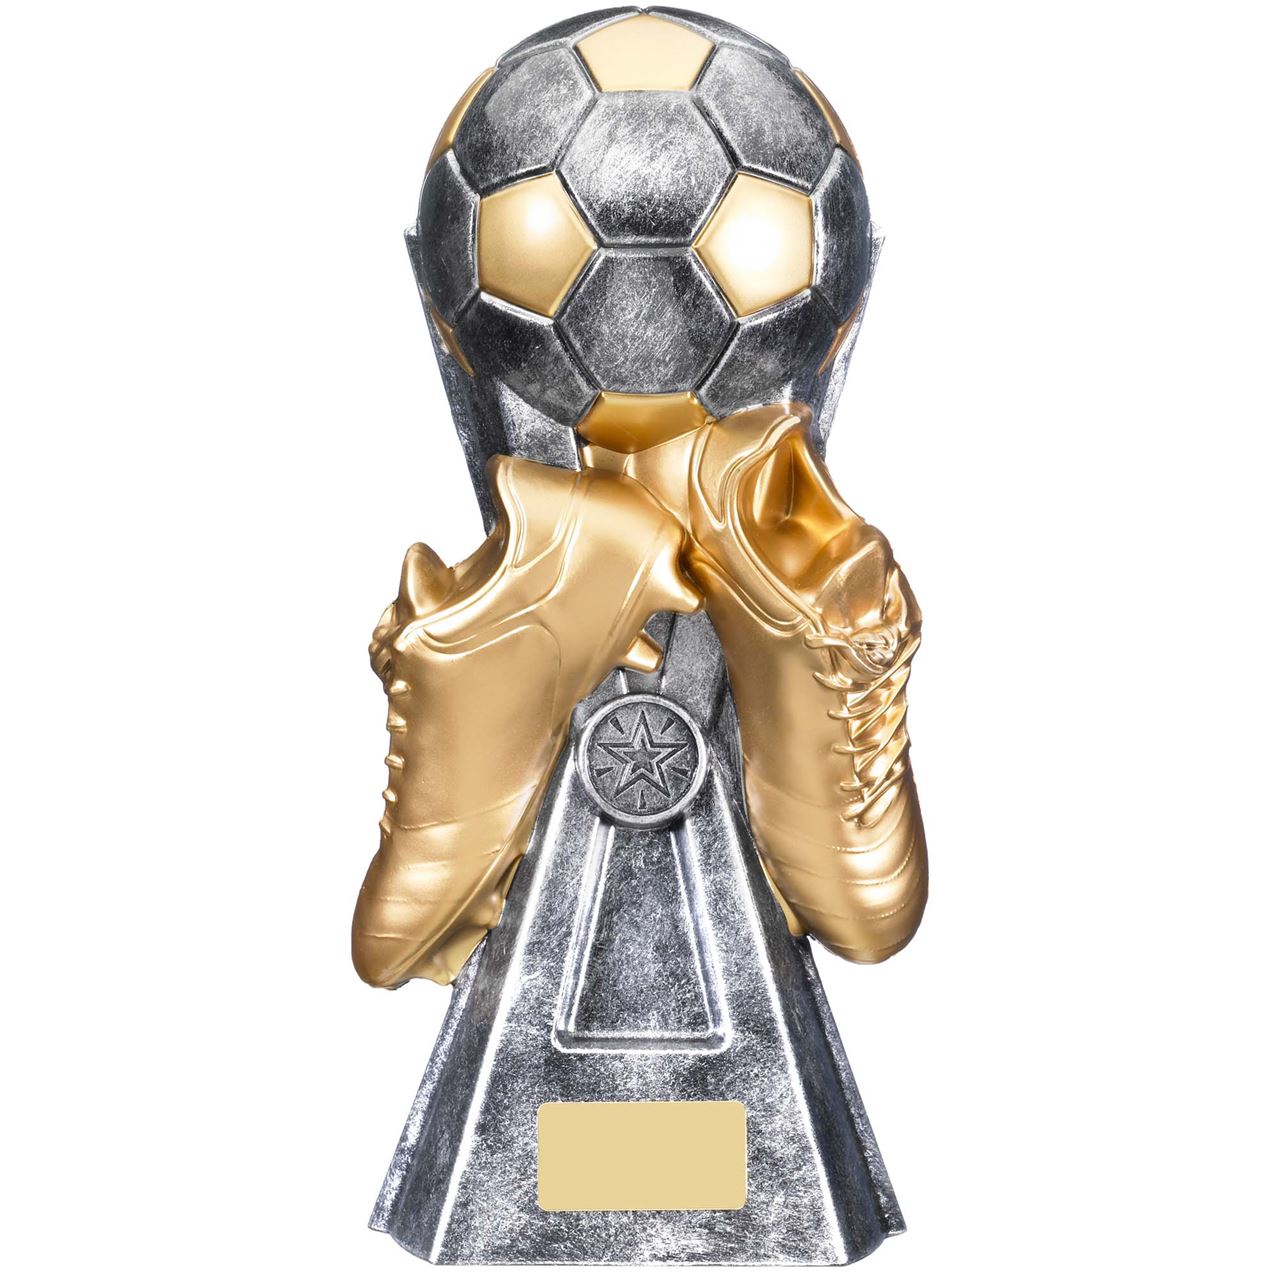 FOOTBALL SOCCER TROPHY 3 SIZES AVAILABLE ENGRAVED FREE BOOT SCORE RESIN TROPHIES 